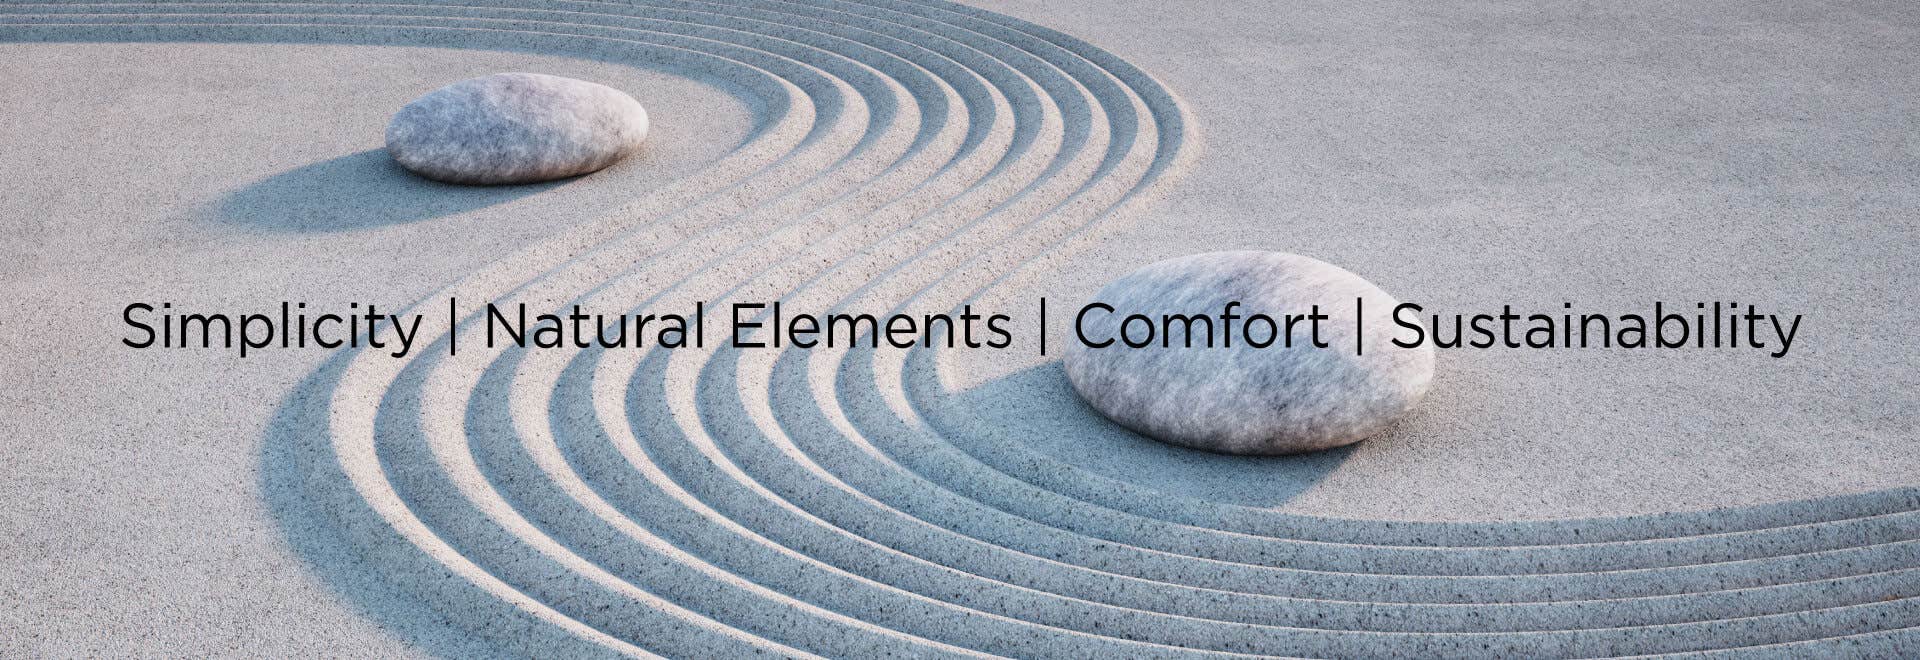 simplicity natural elements Comfort and sustainability